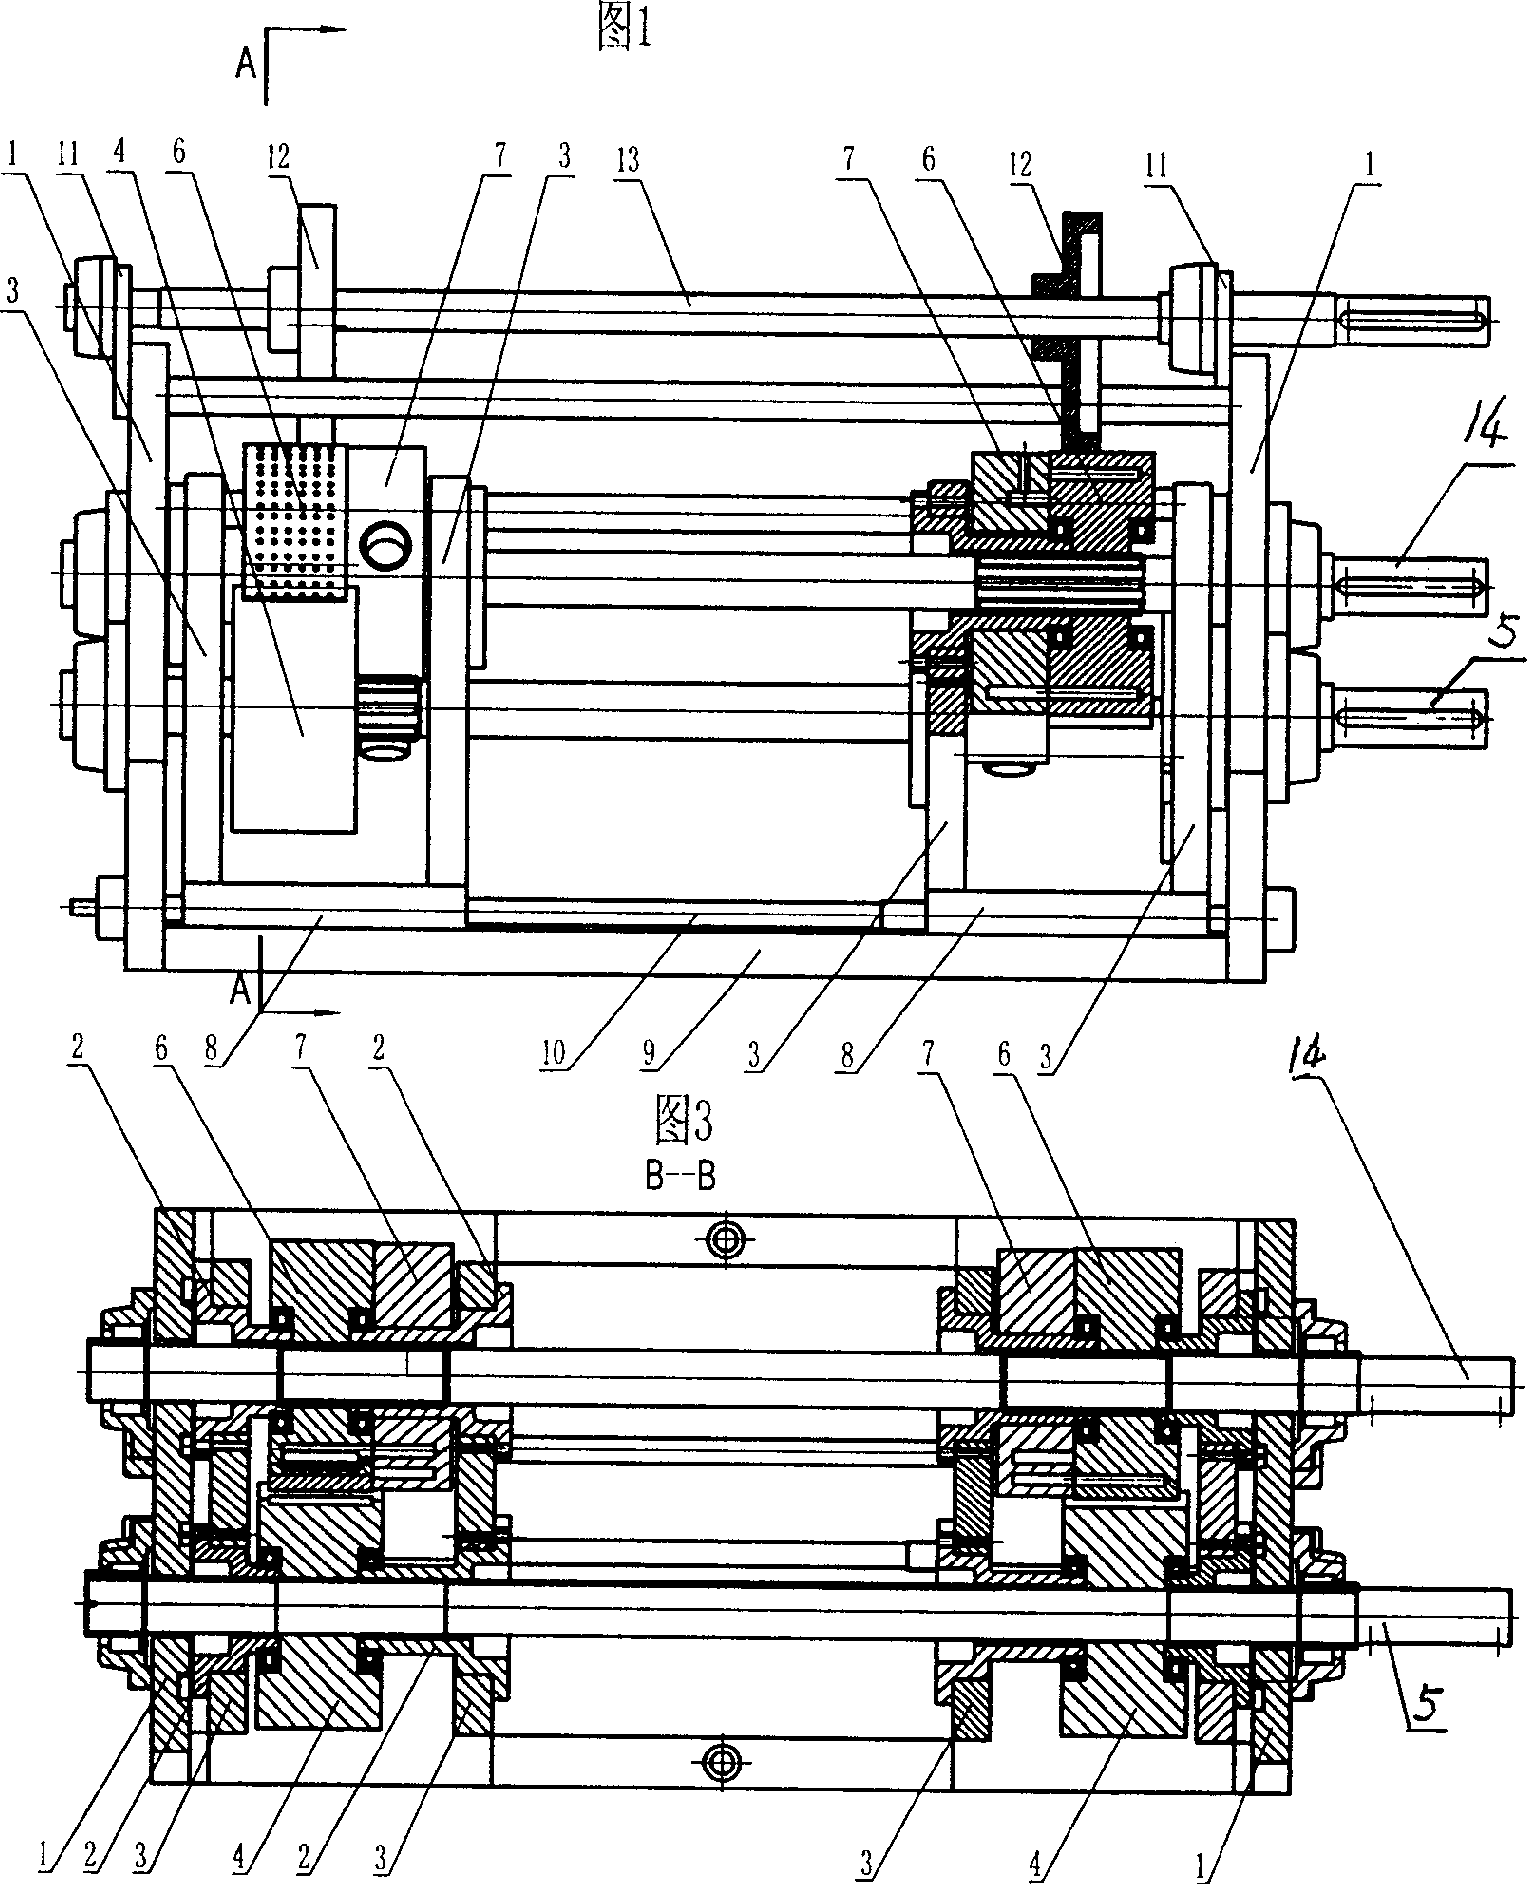 Adjustable double-sided adhesive tape cutting and transferring unit